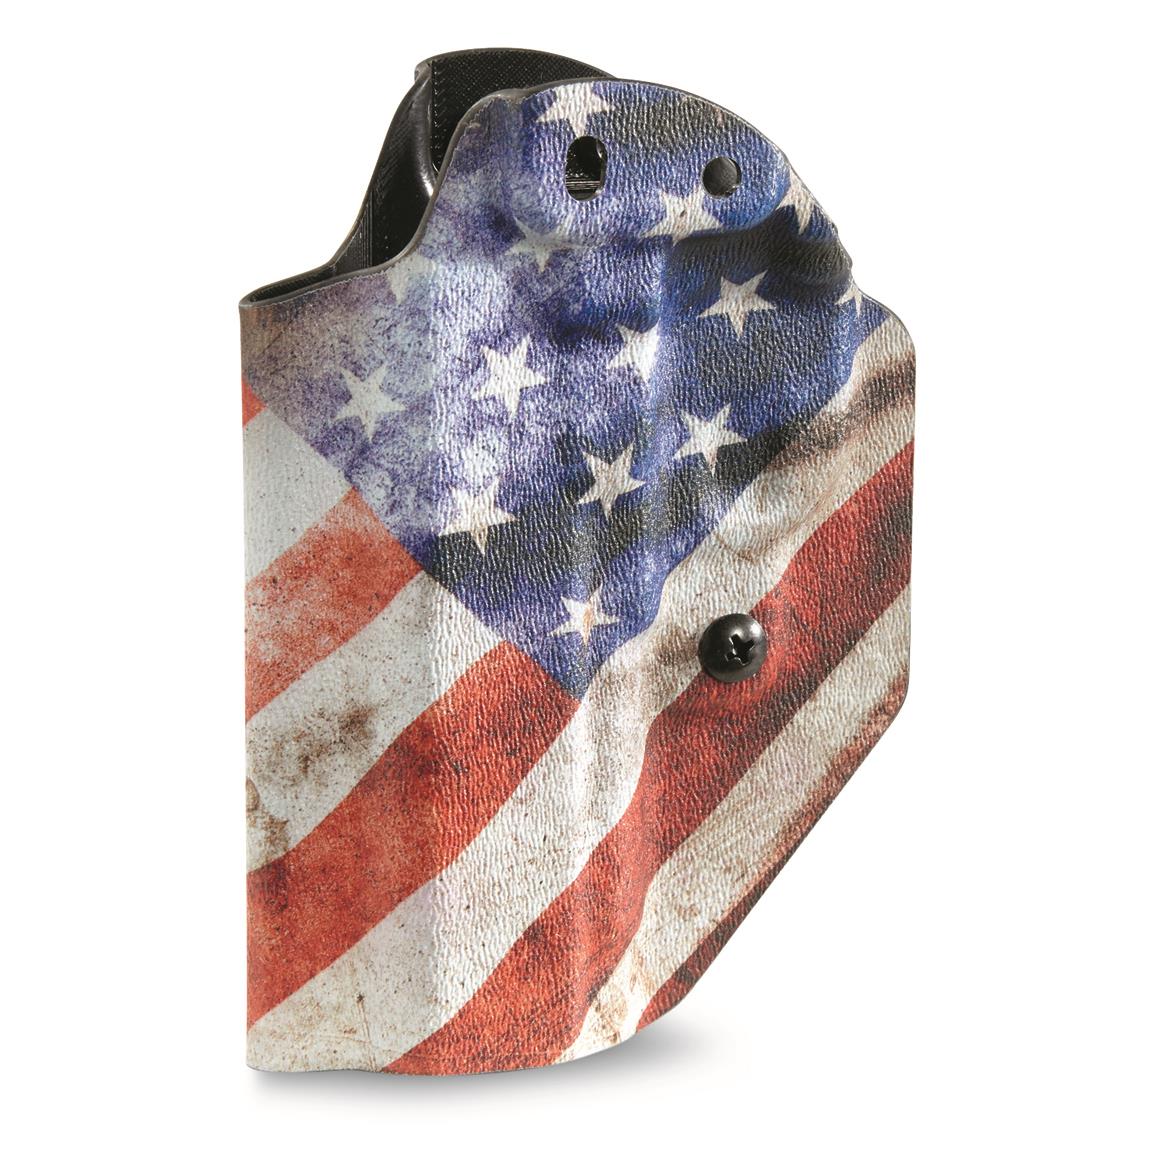 Mission First Tactical Ambidextrous Appendix IWB/OWB Holster, SIG SAUER P365, American Flag